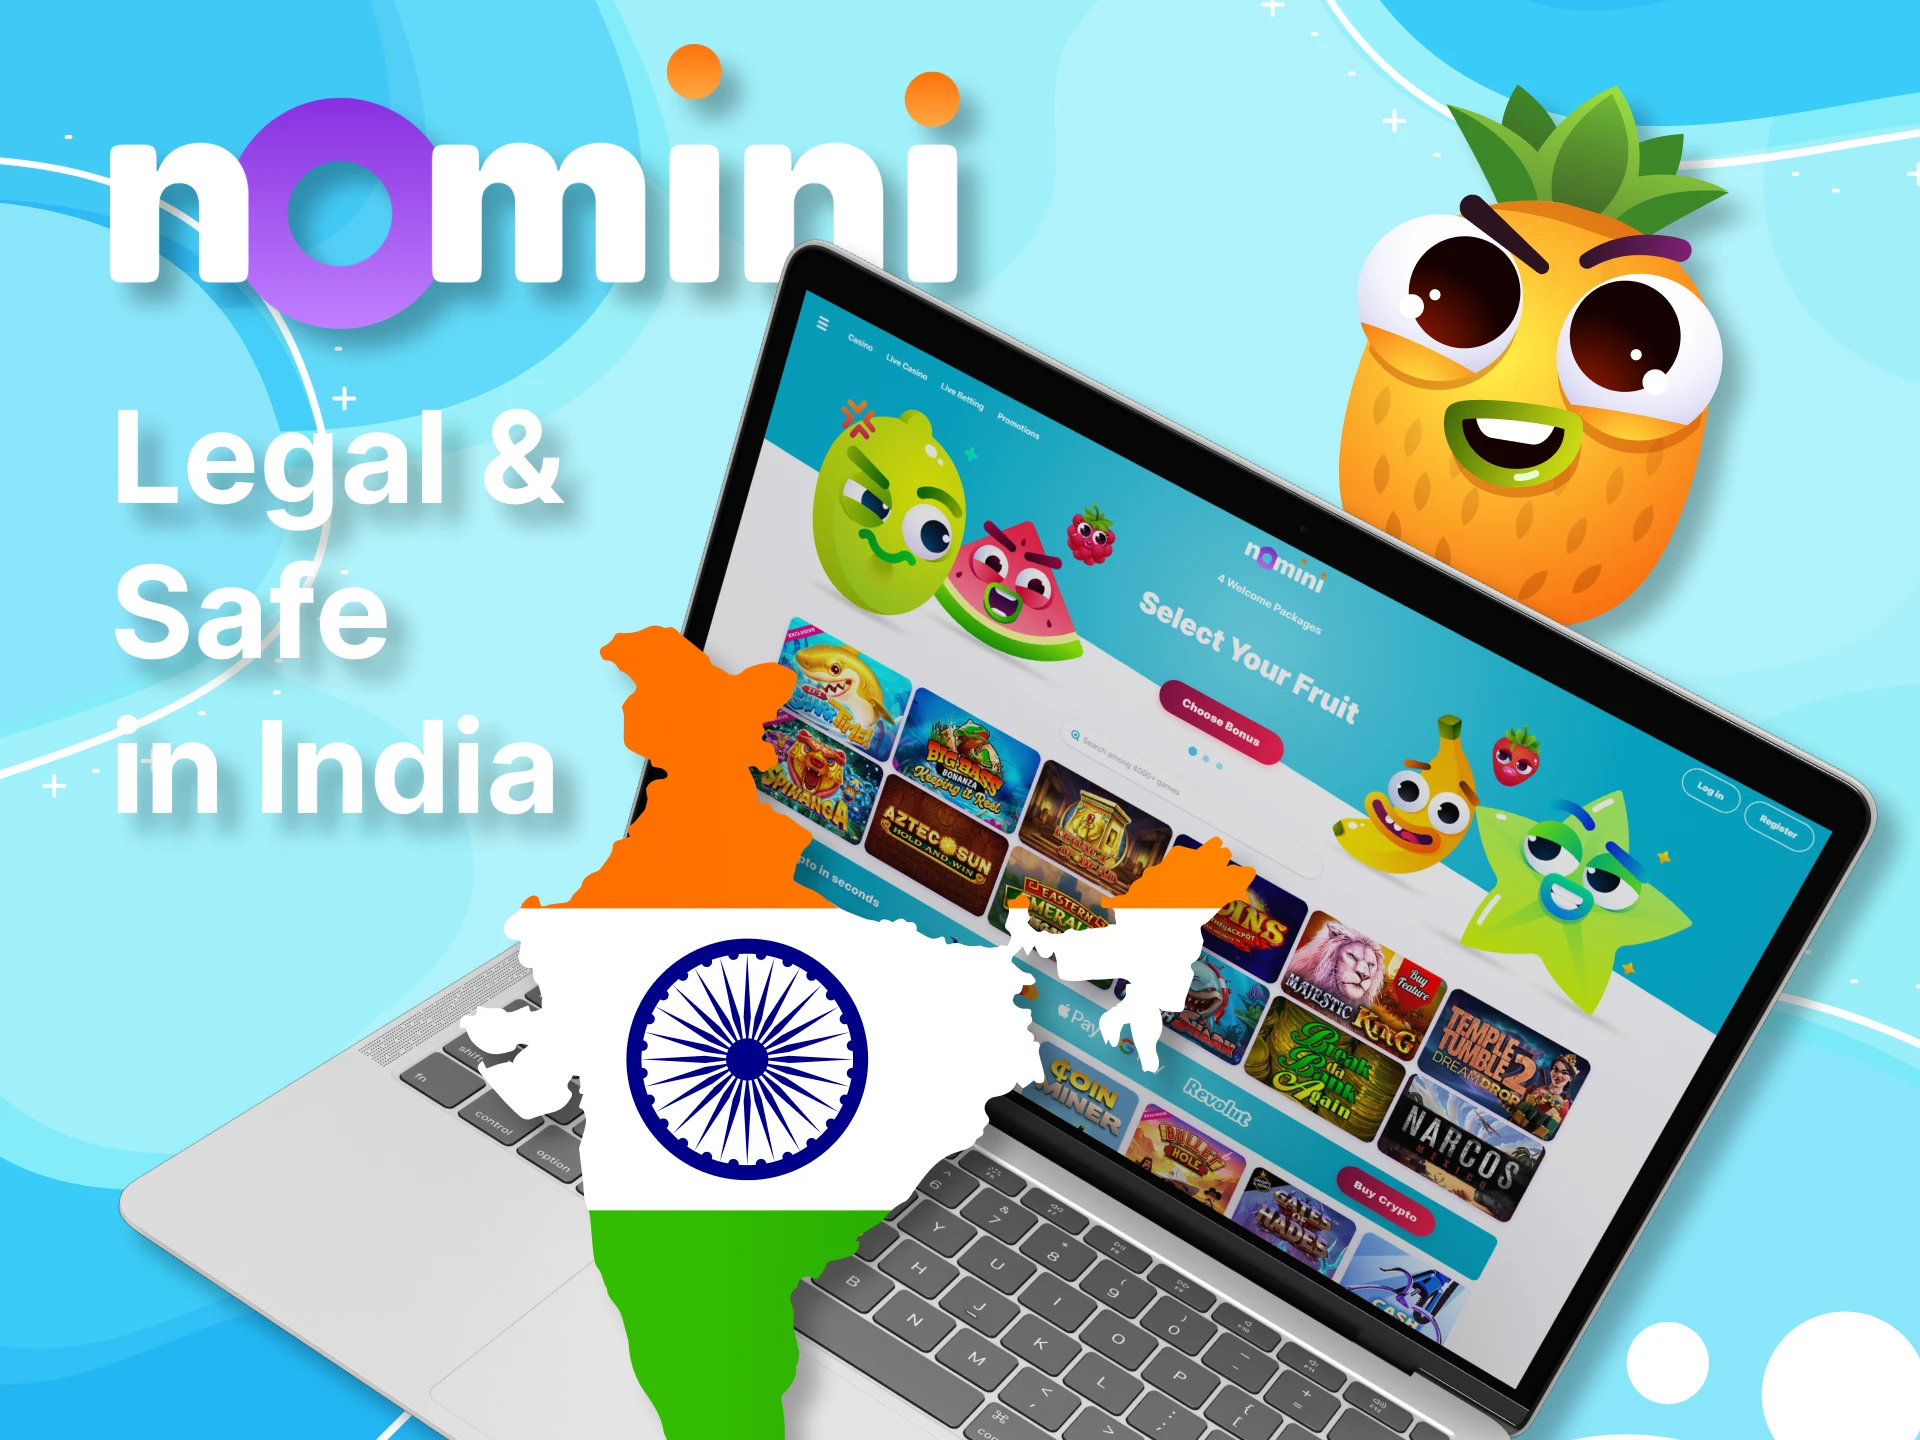 Nomini is legal and safe for players in India.